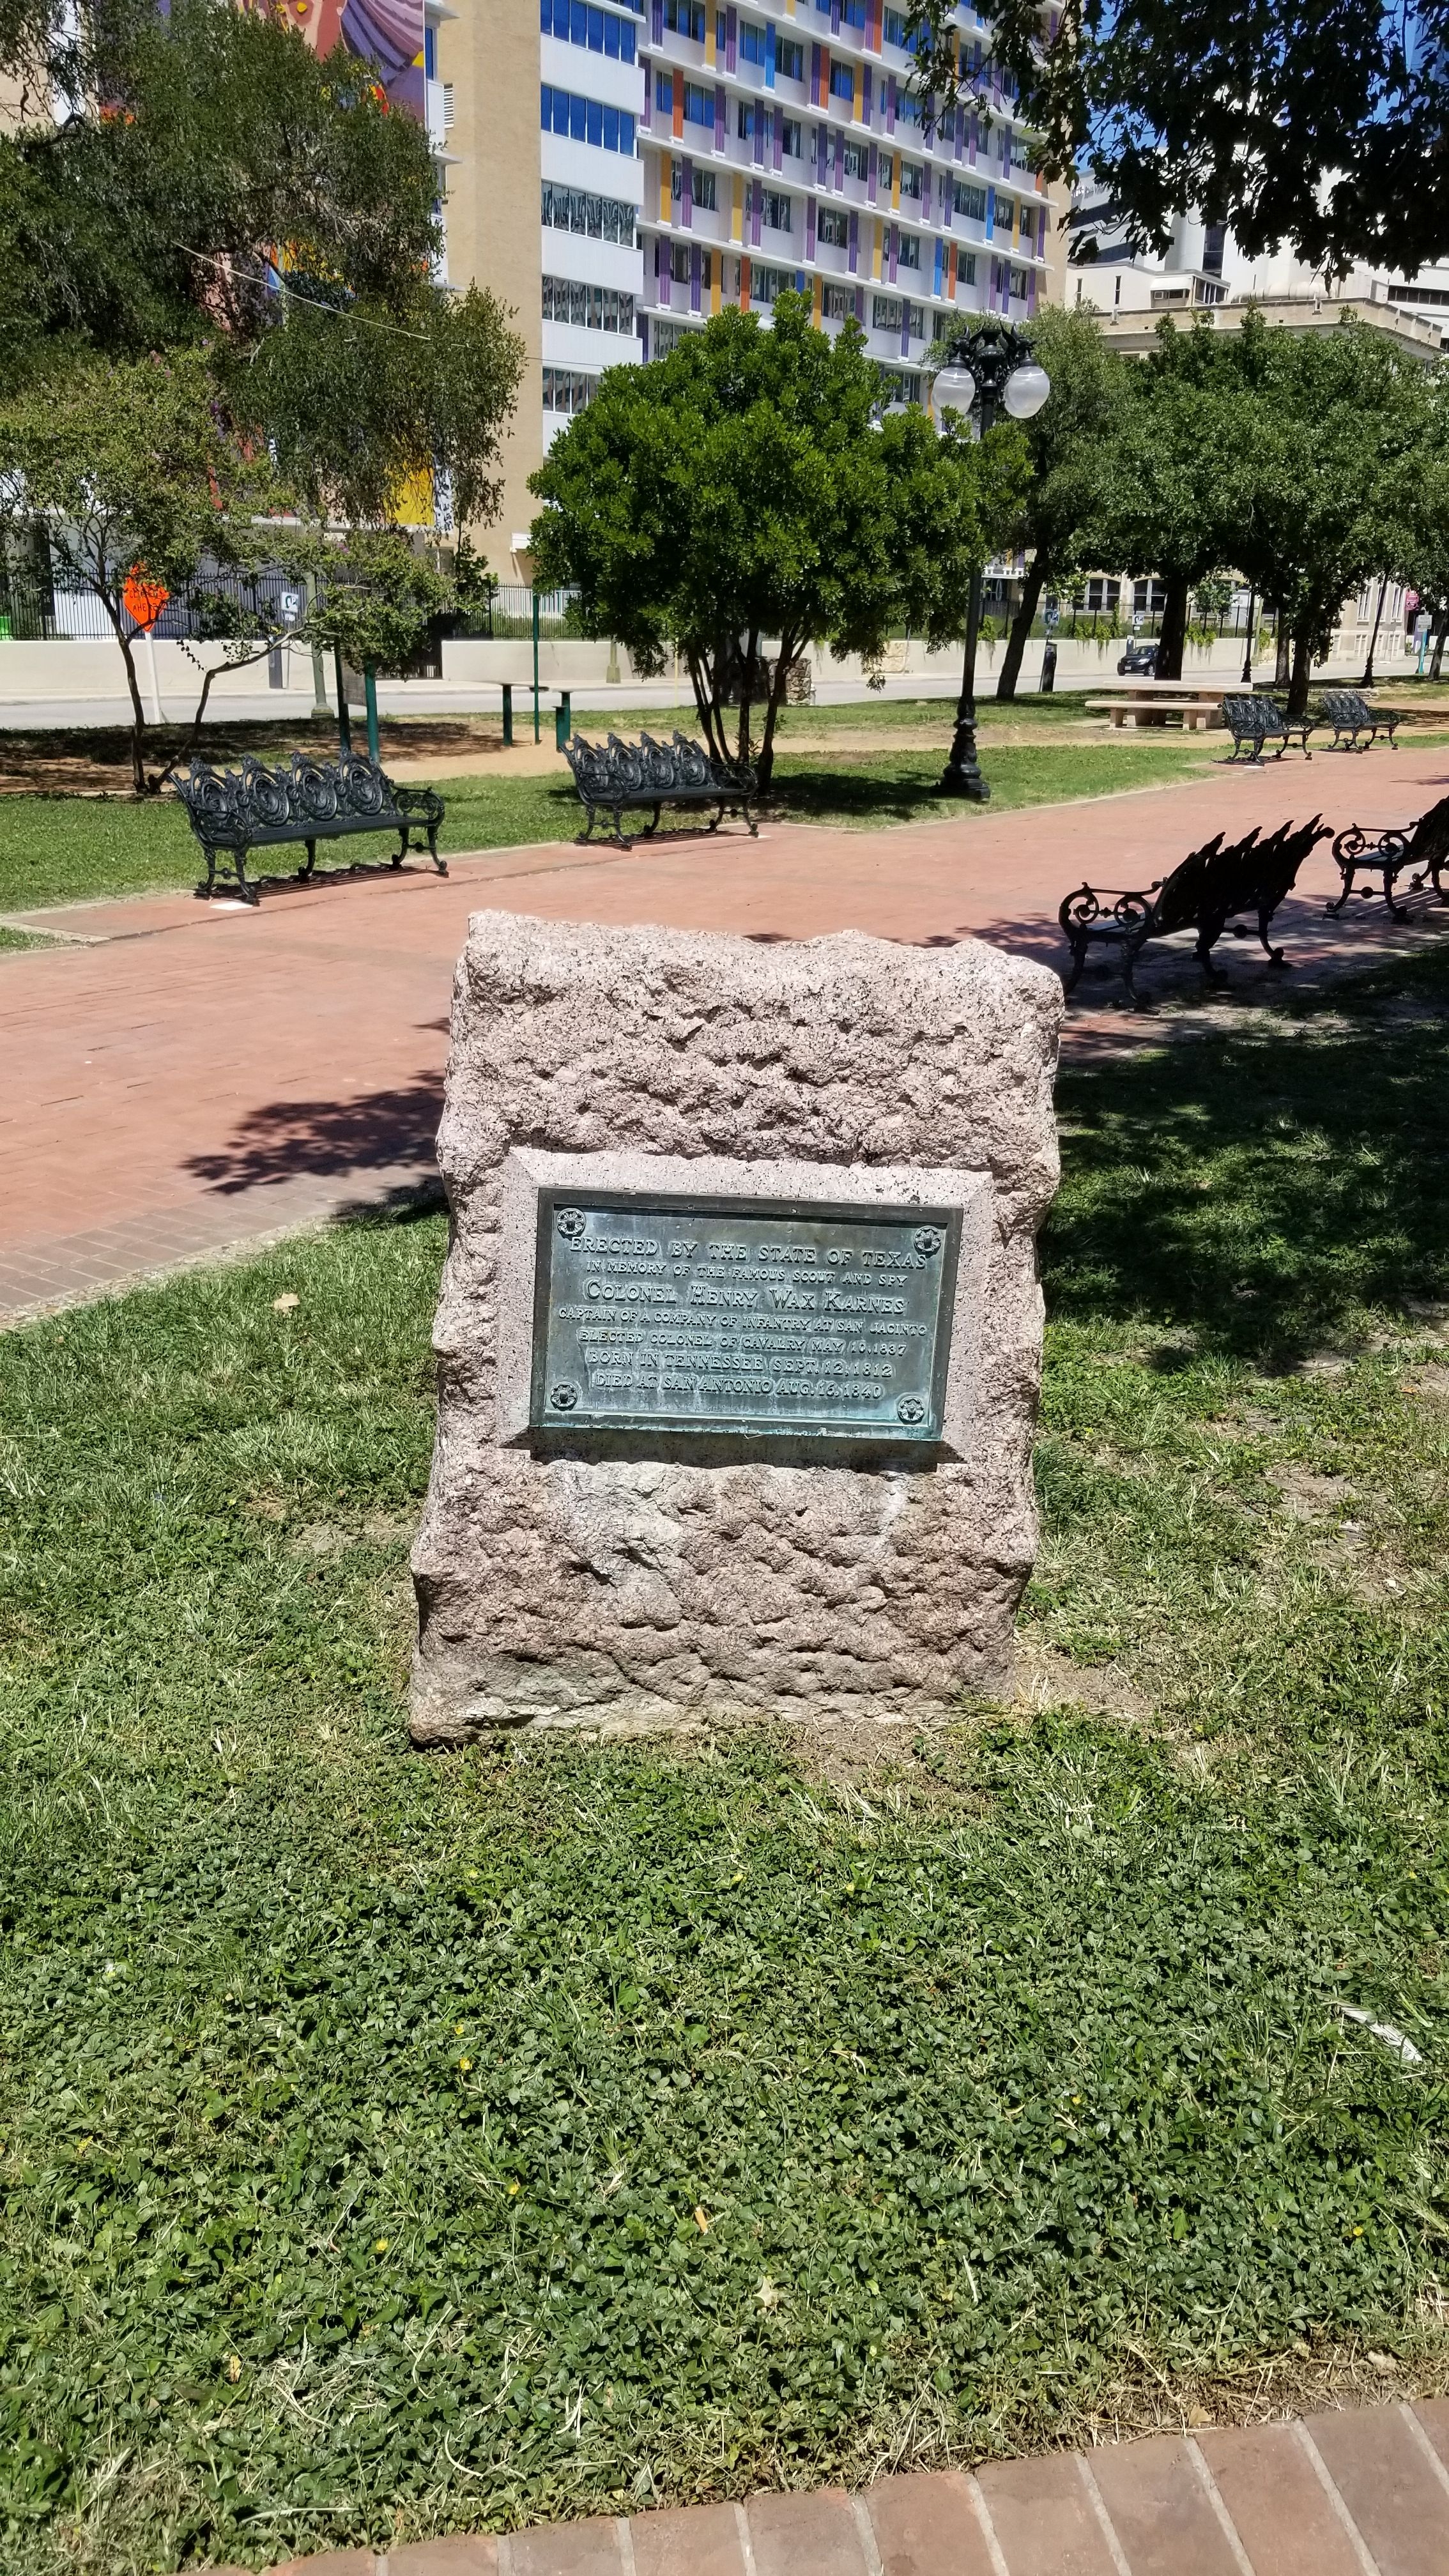 The Colonel Henry Wax Karnes Marker in the park